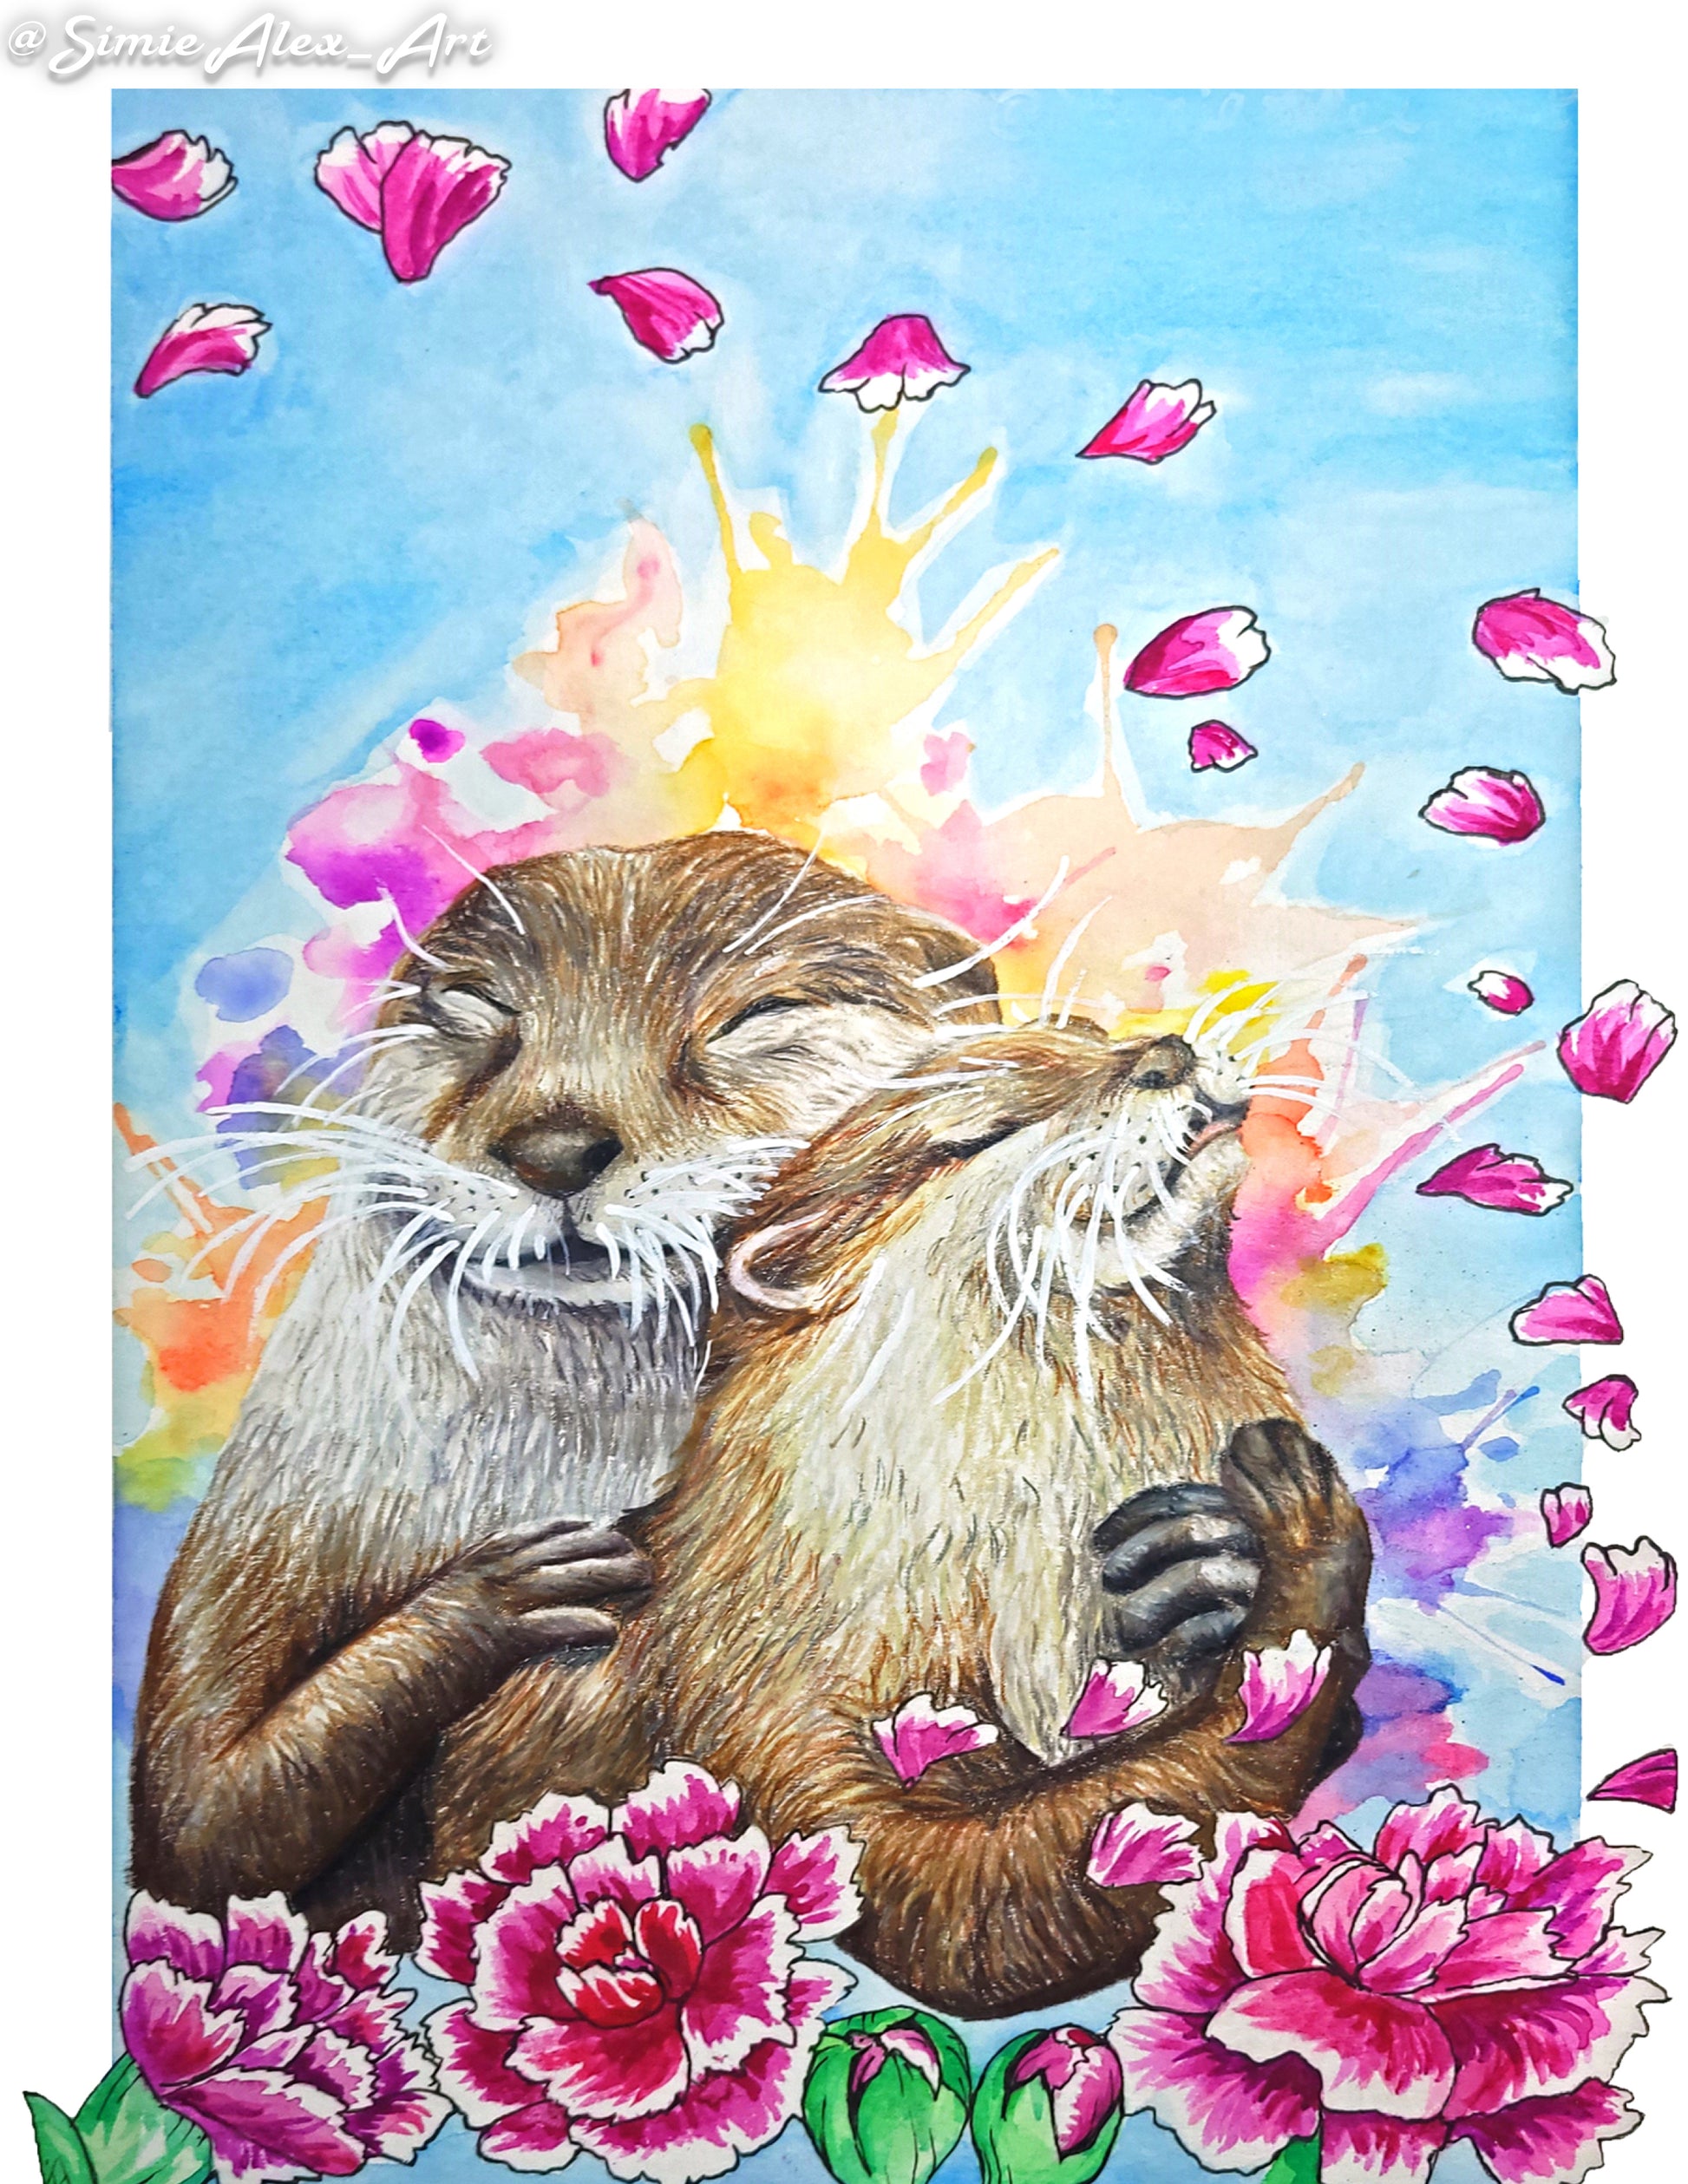 Significant Otter' Art Print – SimieAlexArt